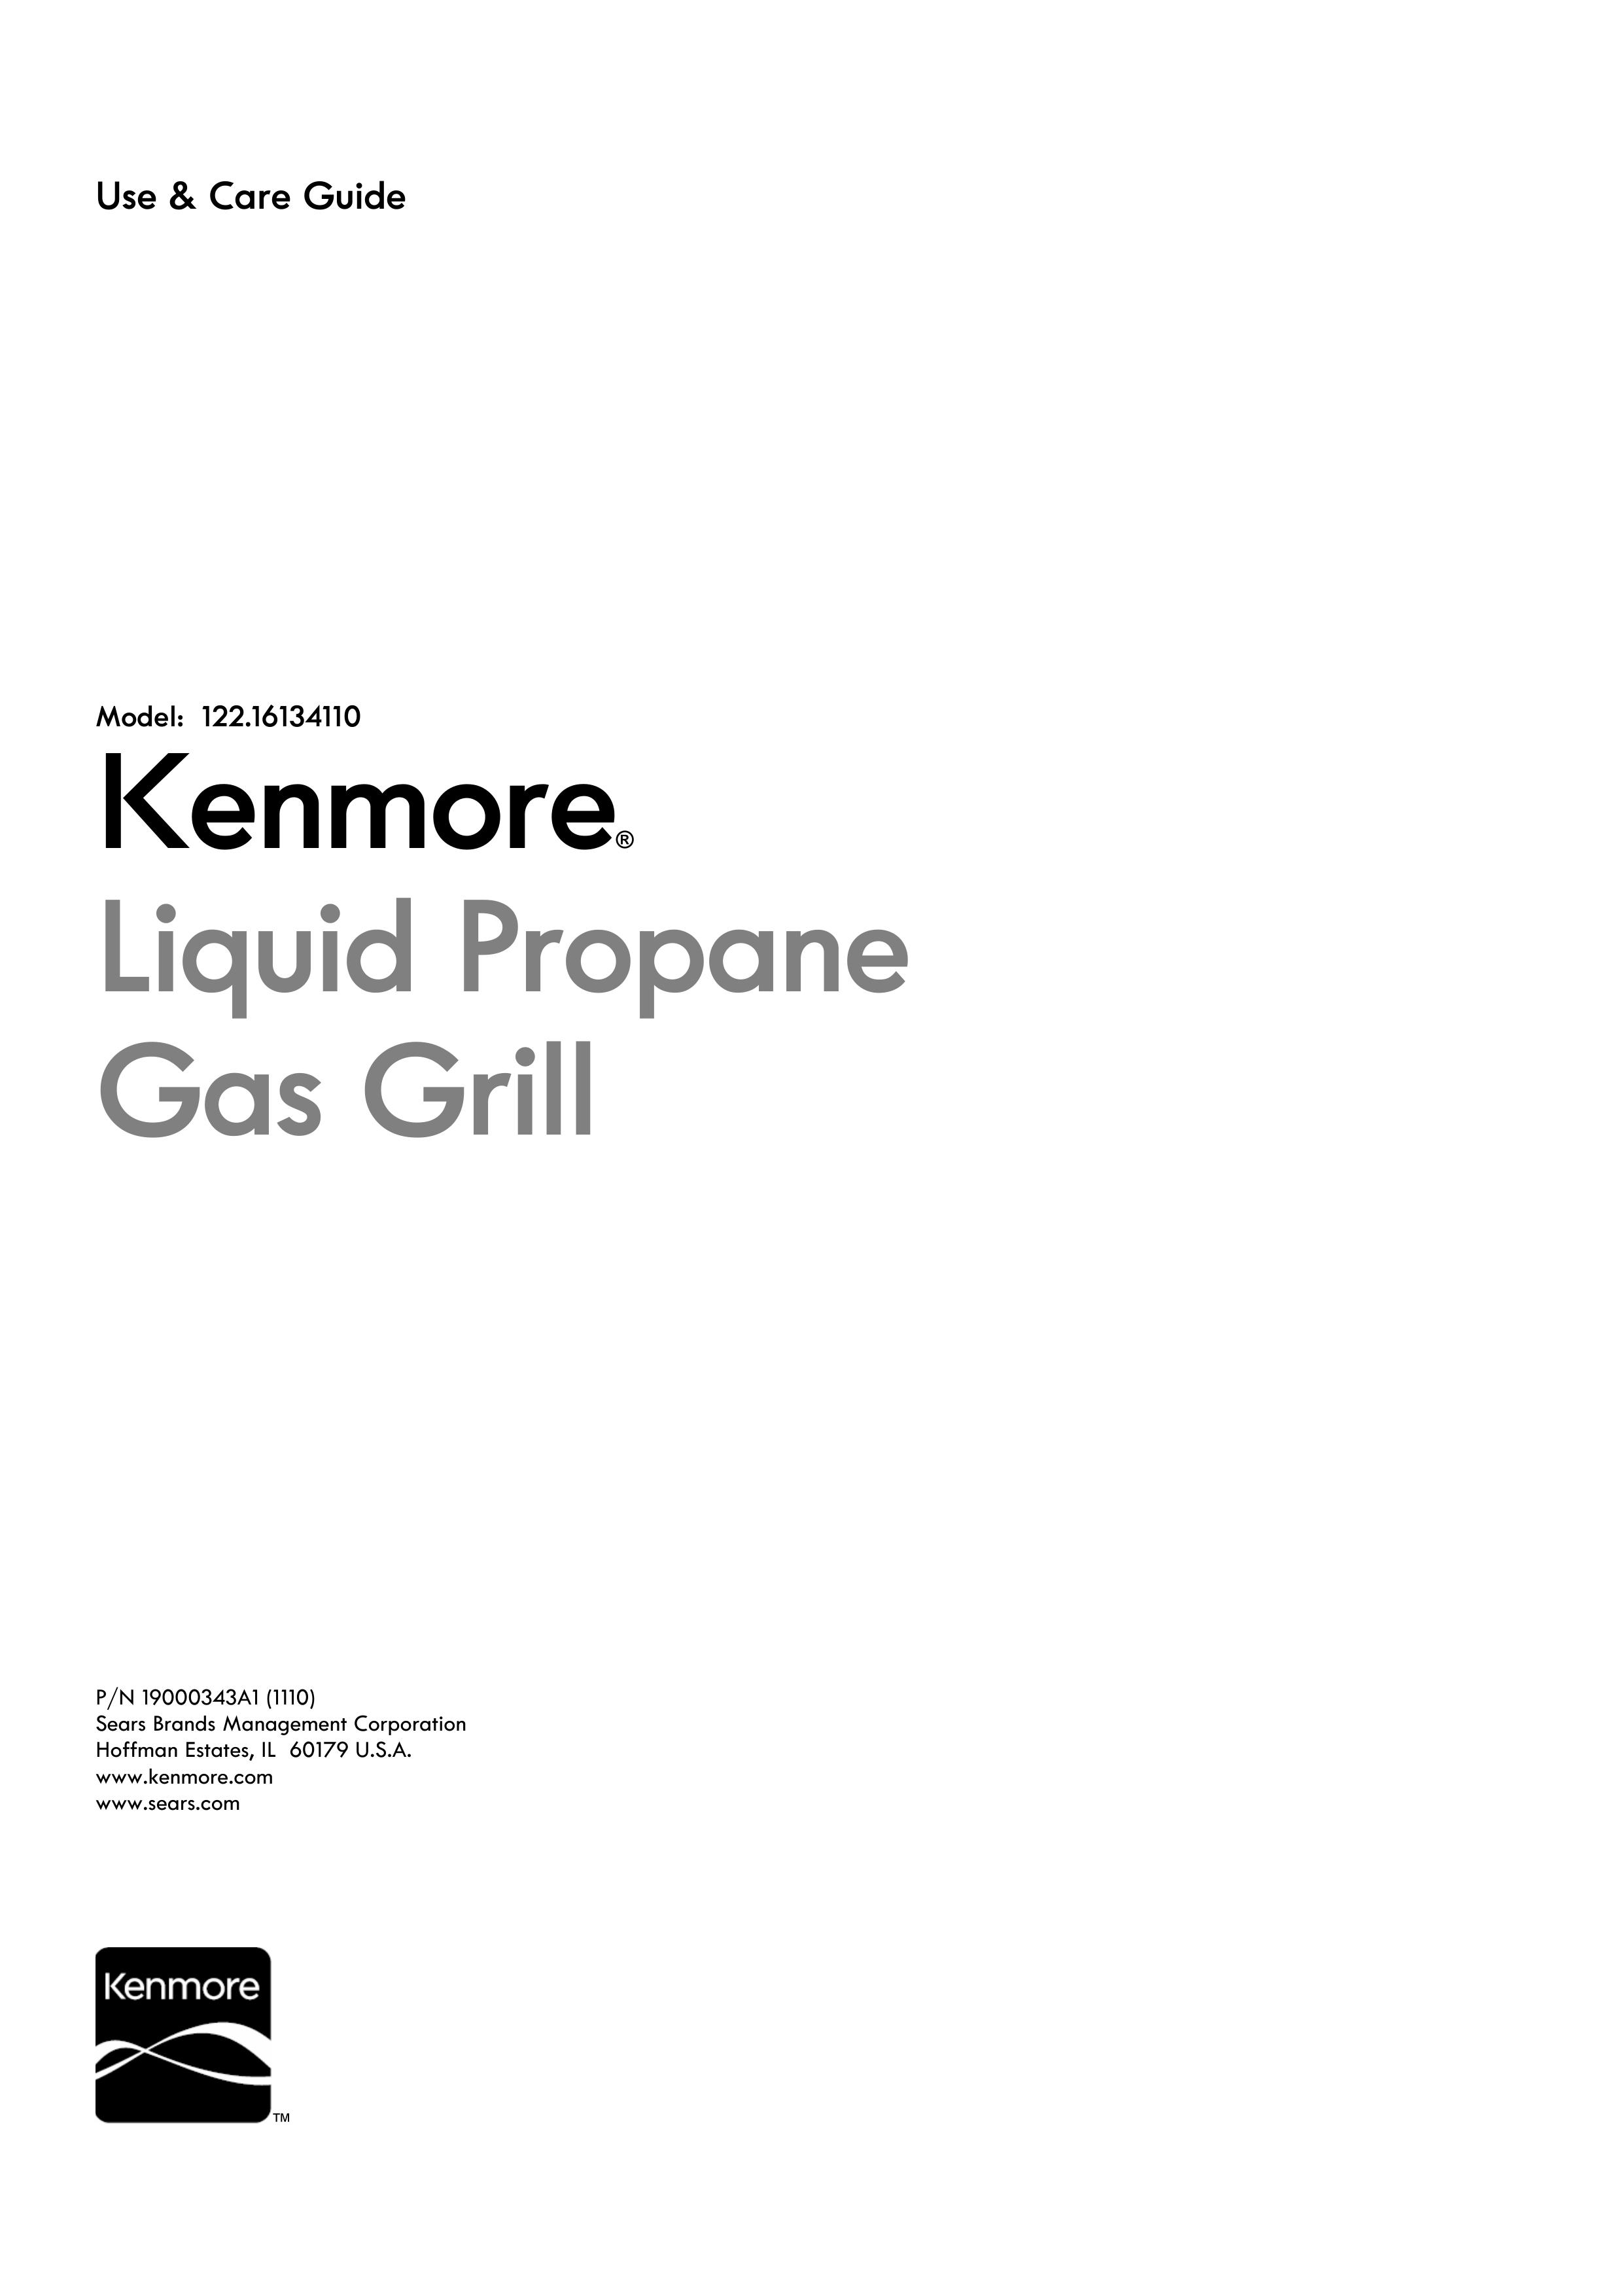 Kenmore 122.1613411 Gas Grill User Manual